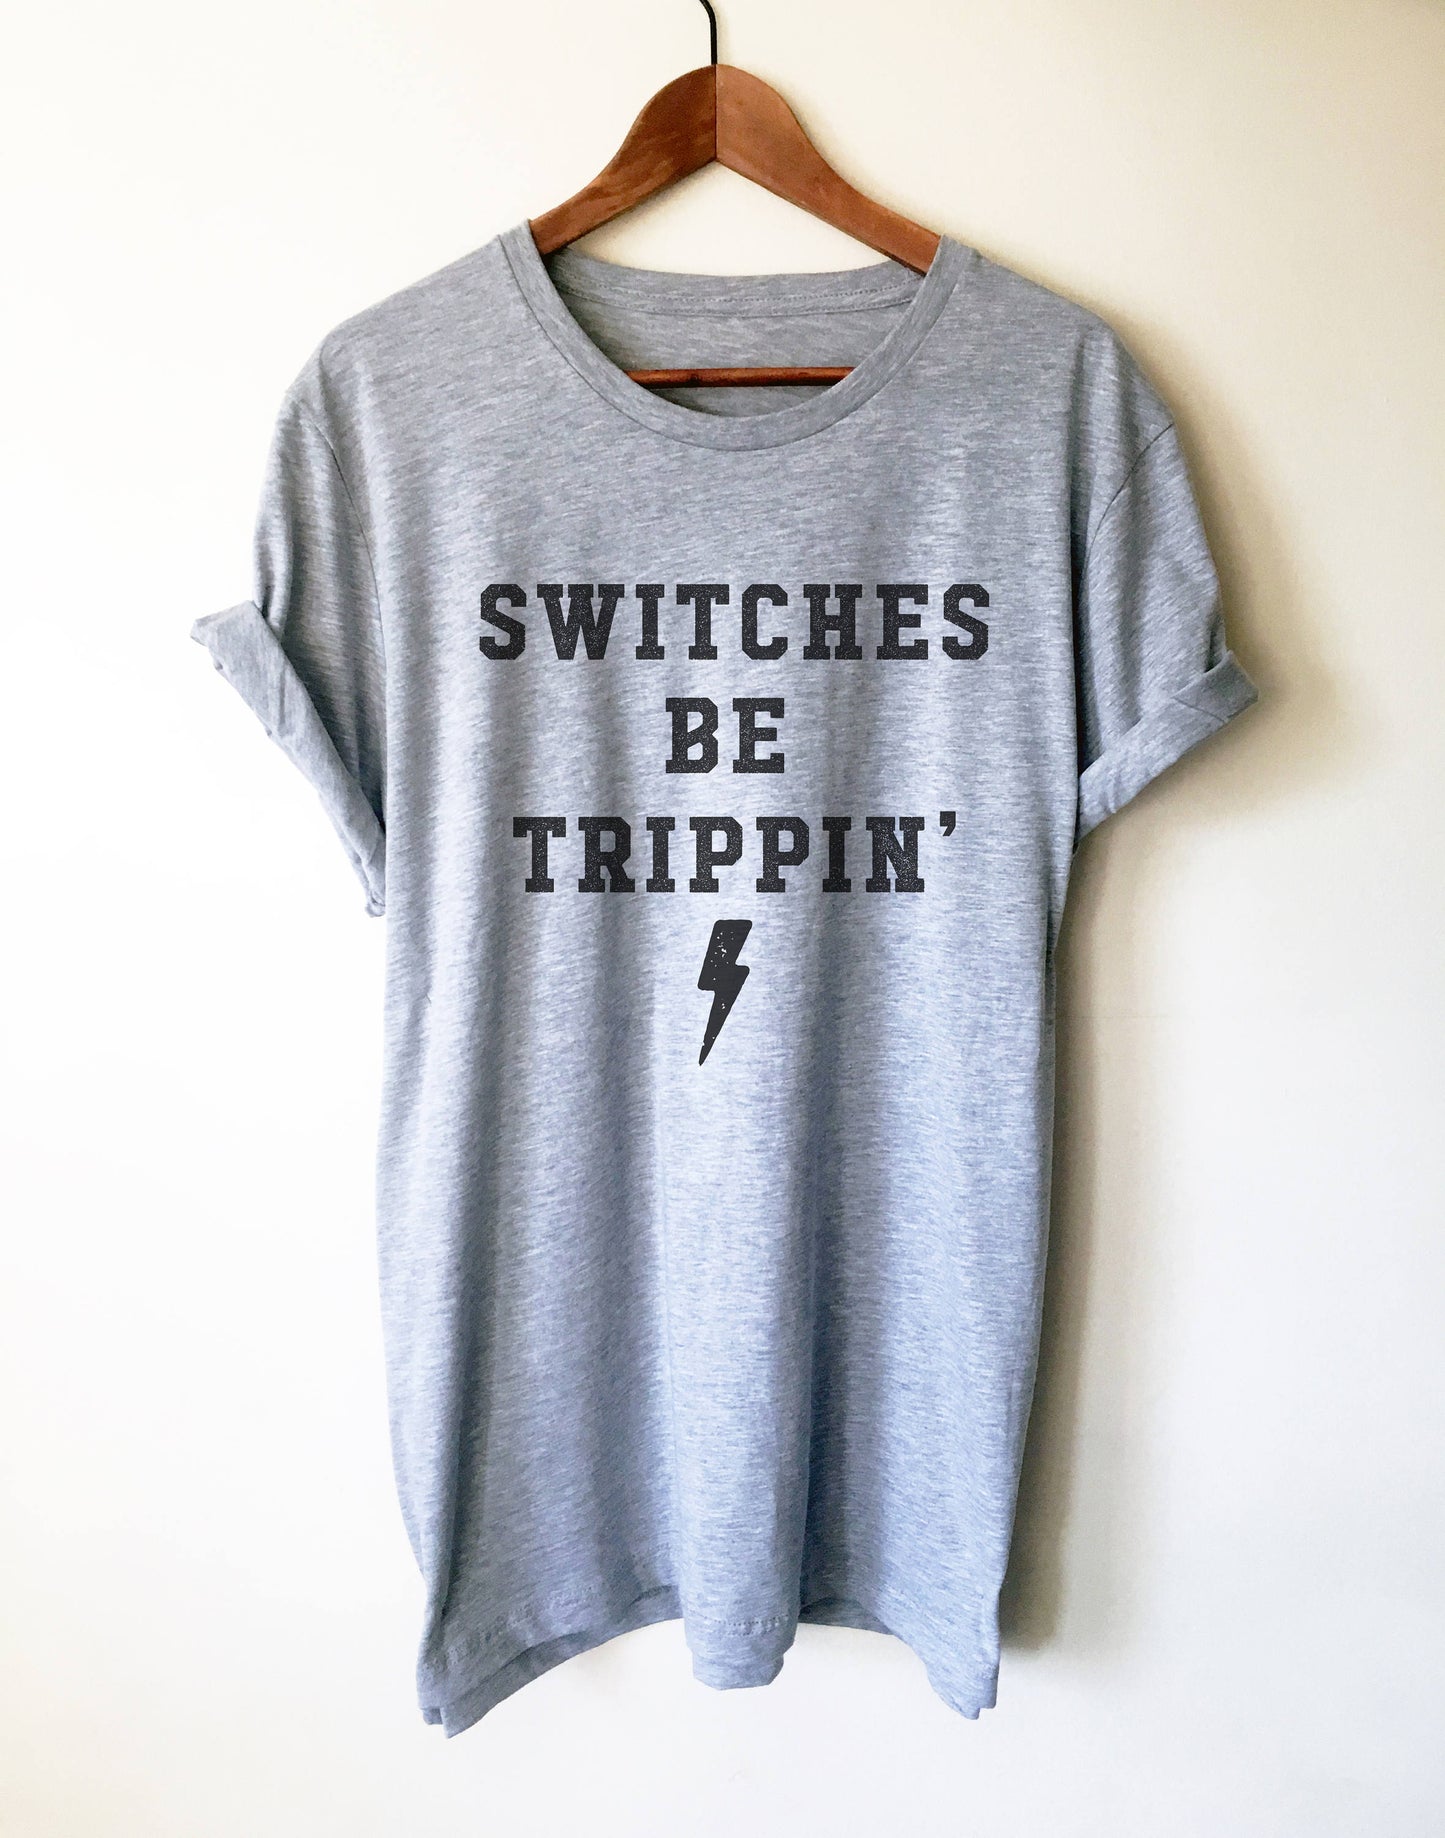 Switches Be Trippin' Unisex Shirt - Electrician Gift, Electricians T-Shirt, Electrician Shirt, Fathers Day Gift, Gift For Coworker